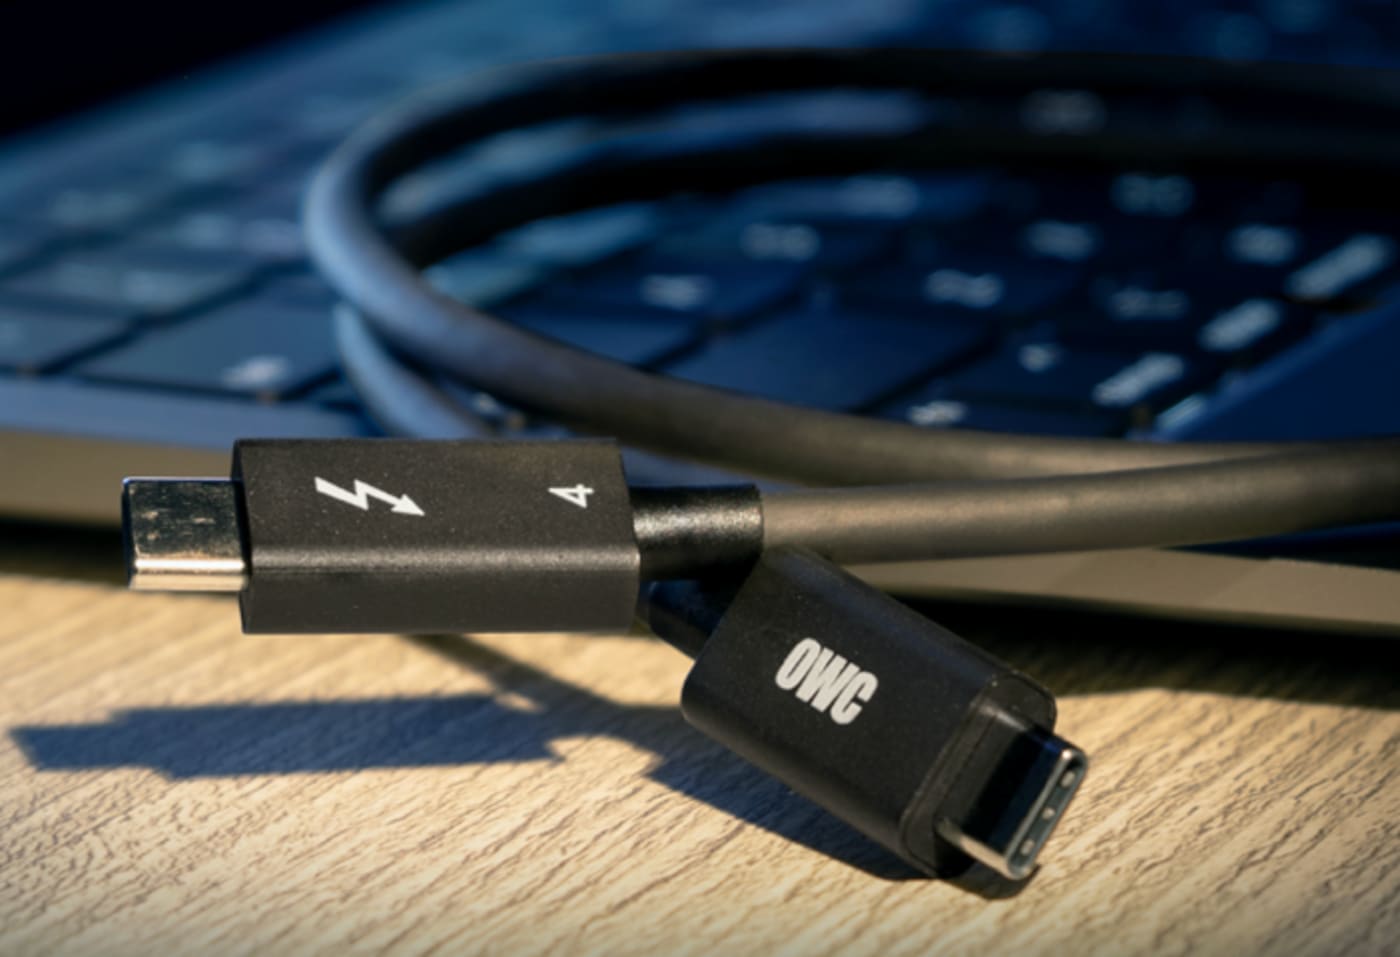 Everything you need to know about USB-C with Thunderbolt 4